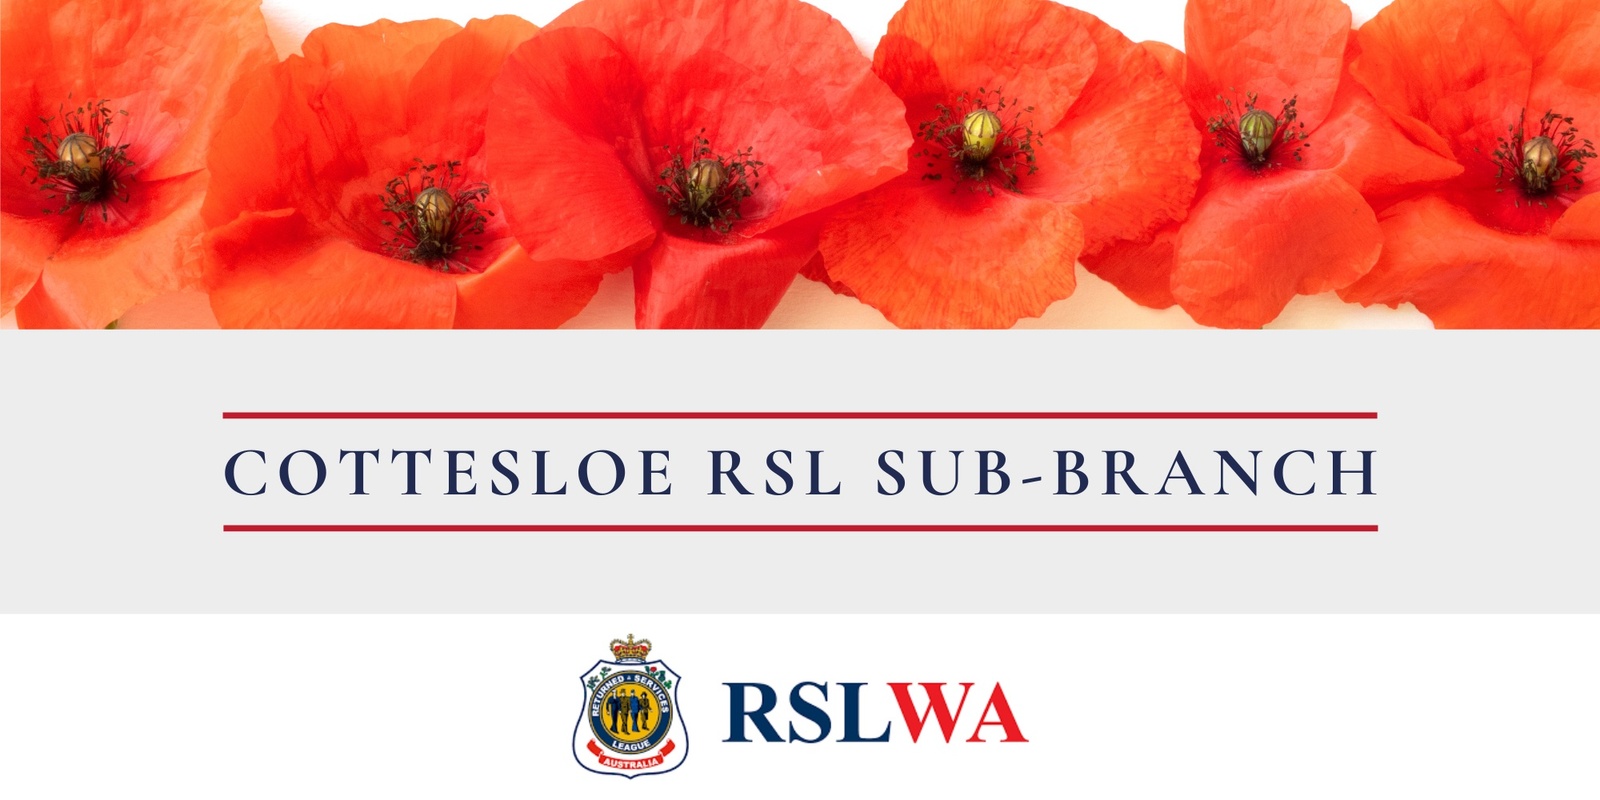 Cottesloe RSL Sub-Branch's banner